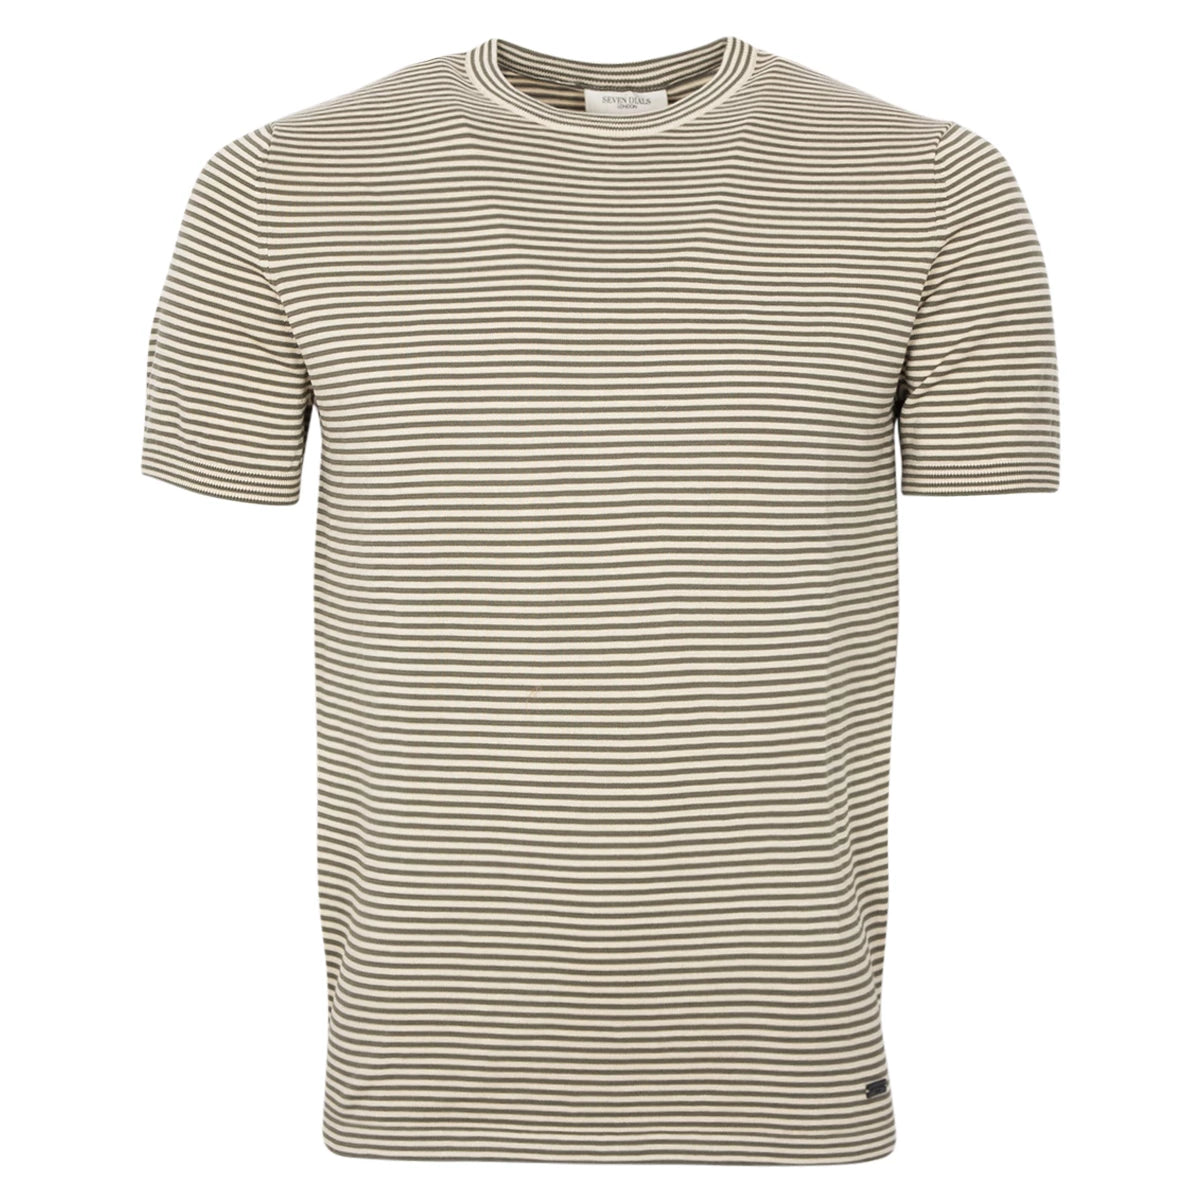 SEVEN DIALS T-shirt groen wit | Charsly